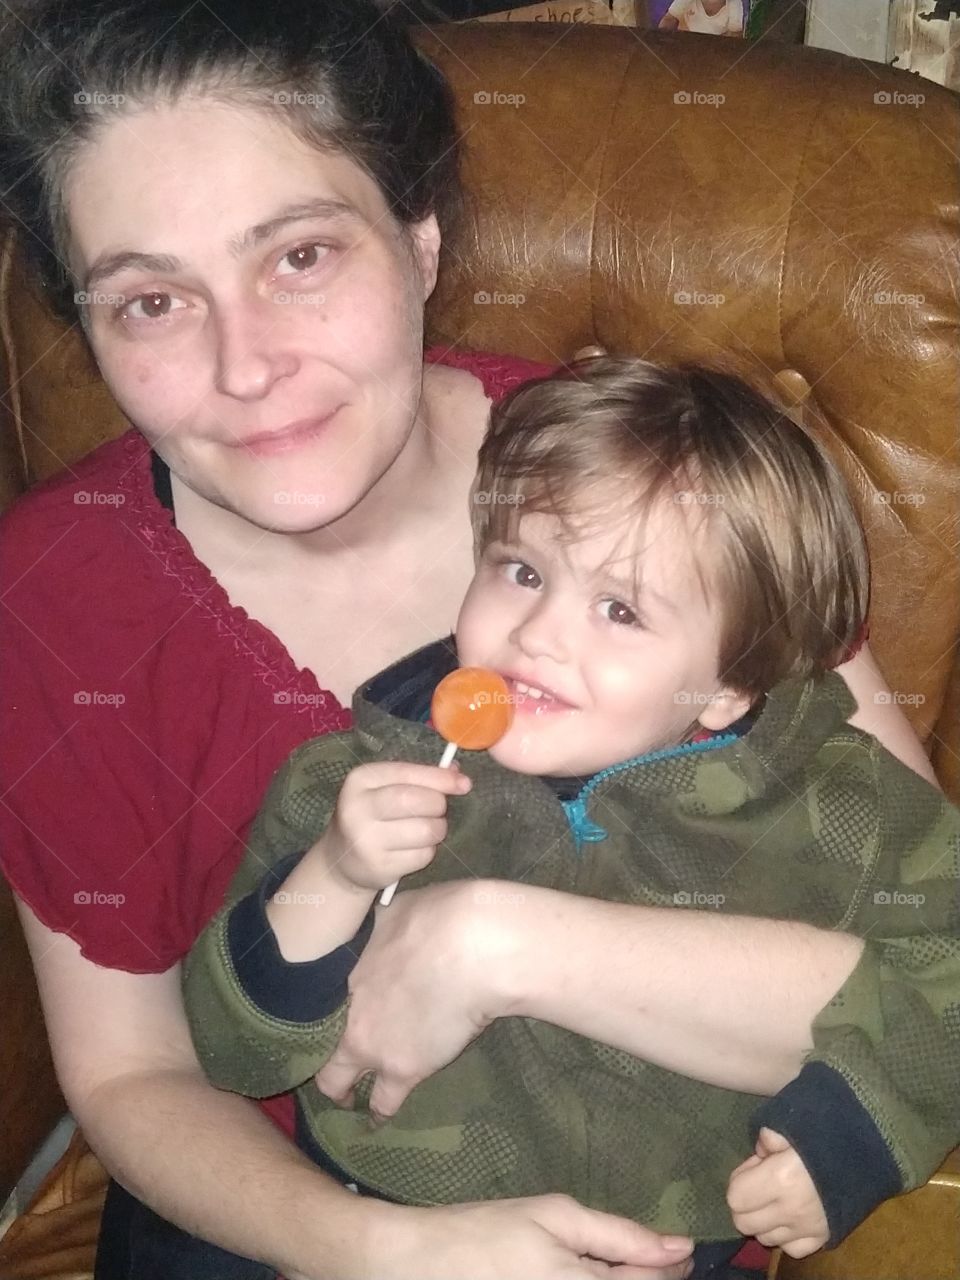 3-year-old son sitting with his mother licking an orange lolipop.